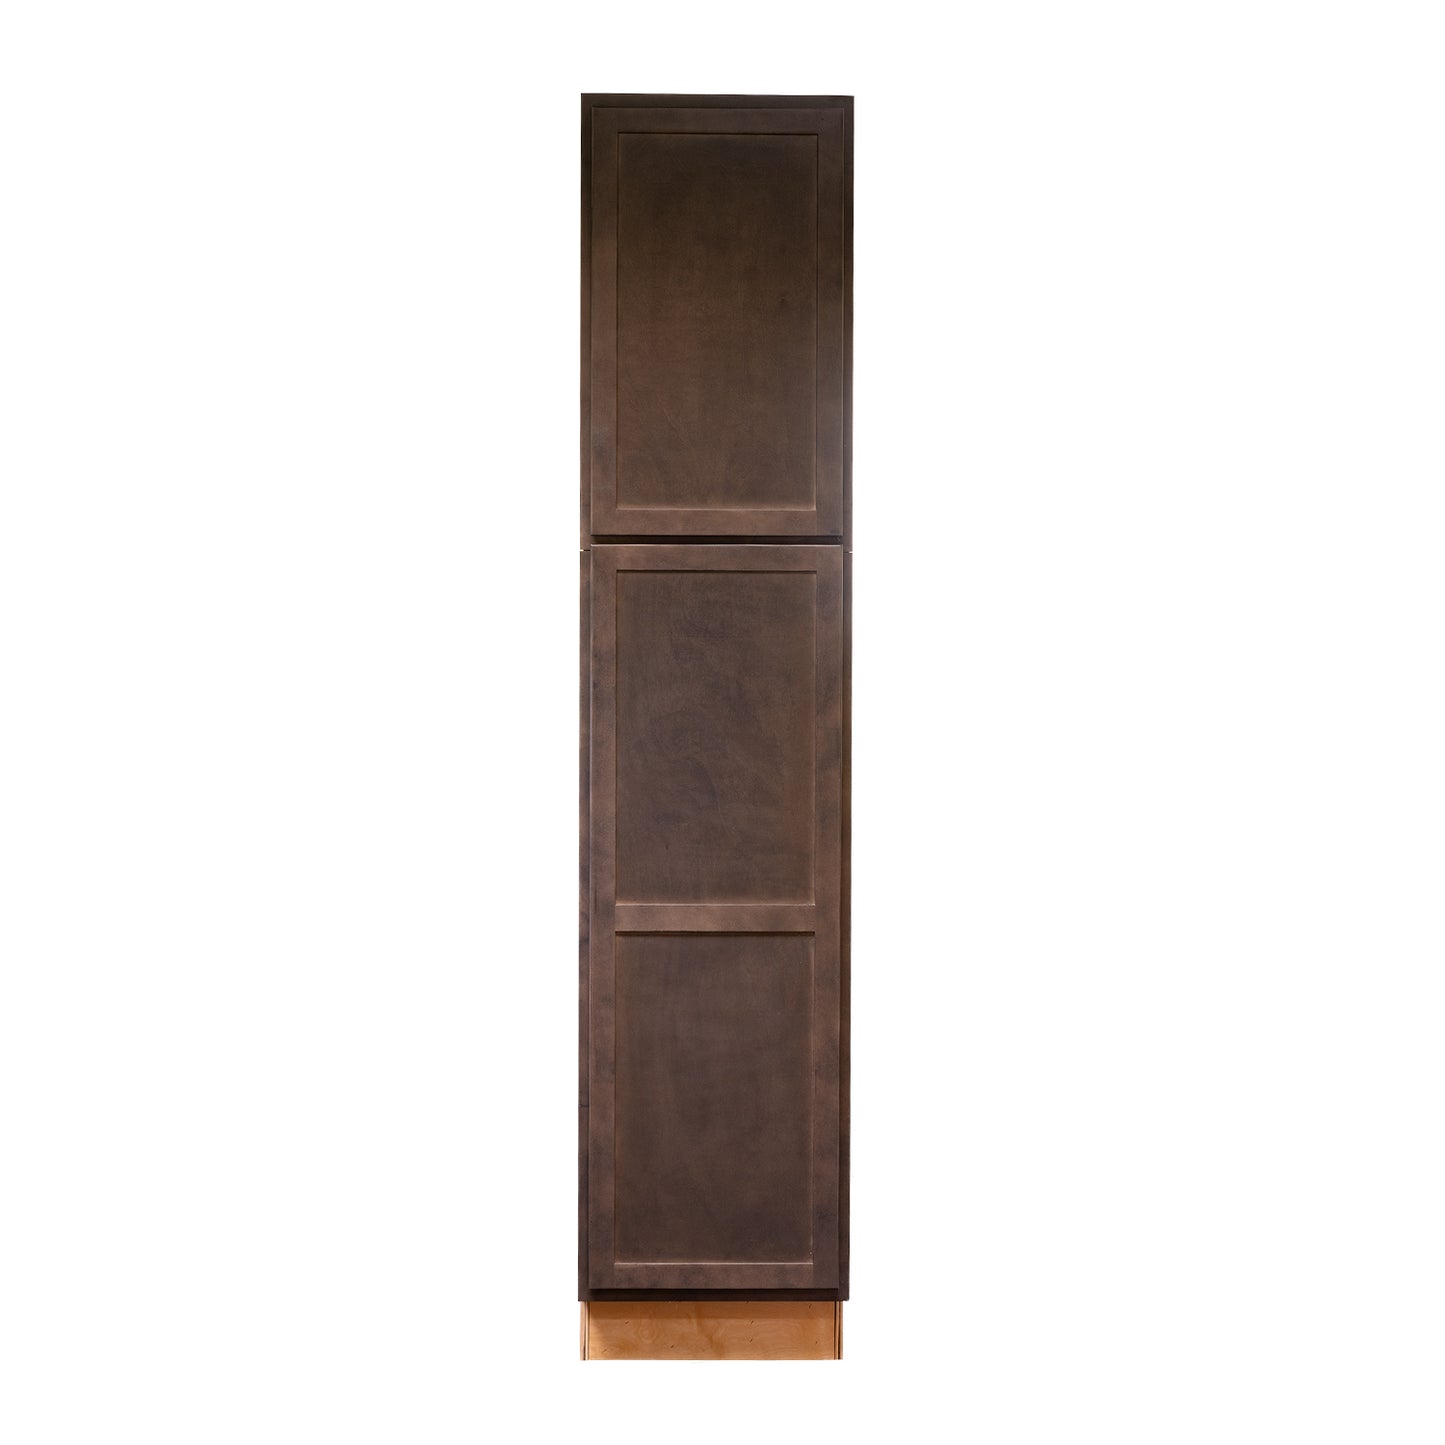 Quicklock RTA (Ready-to-Assemble) Espresso Stain Pantry Cabinet- 24" W